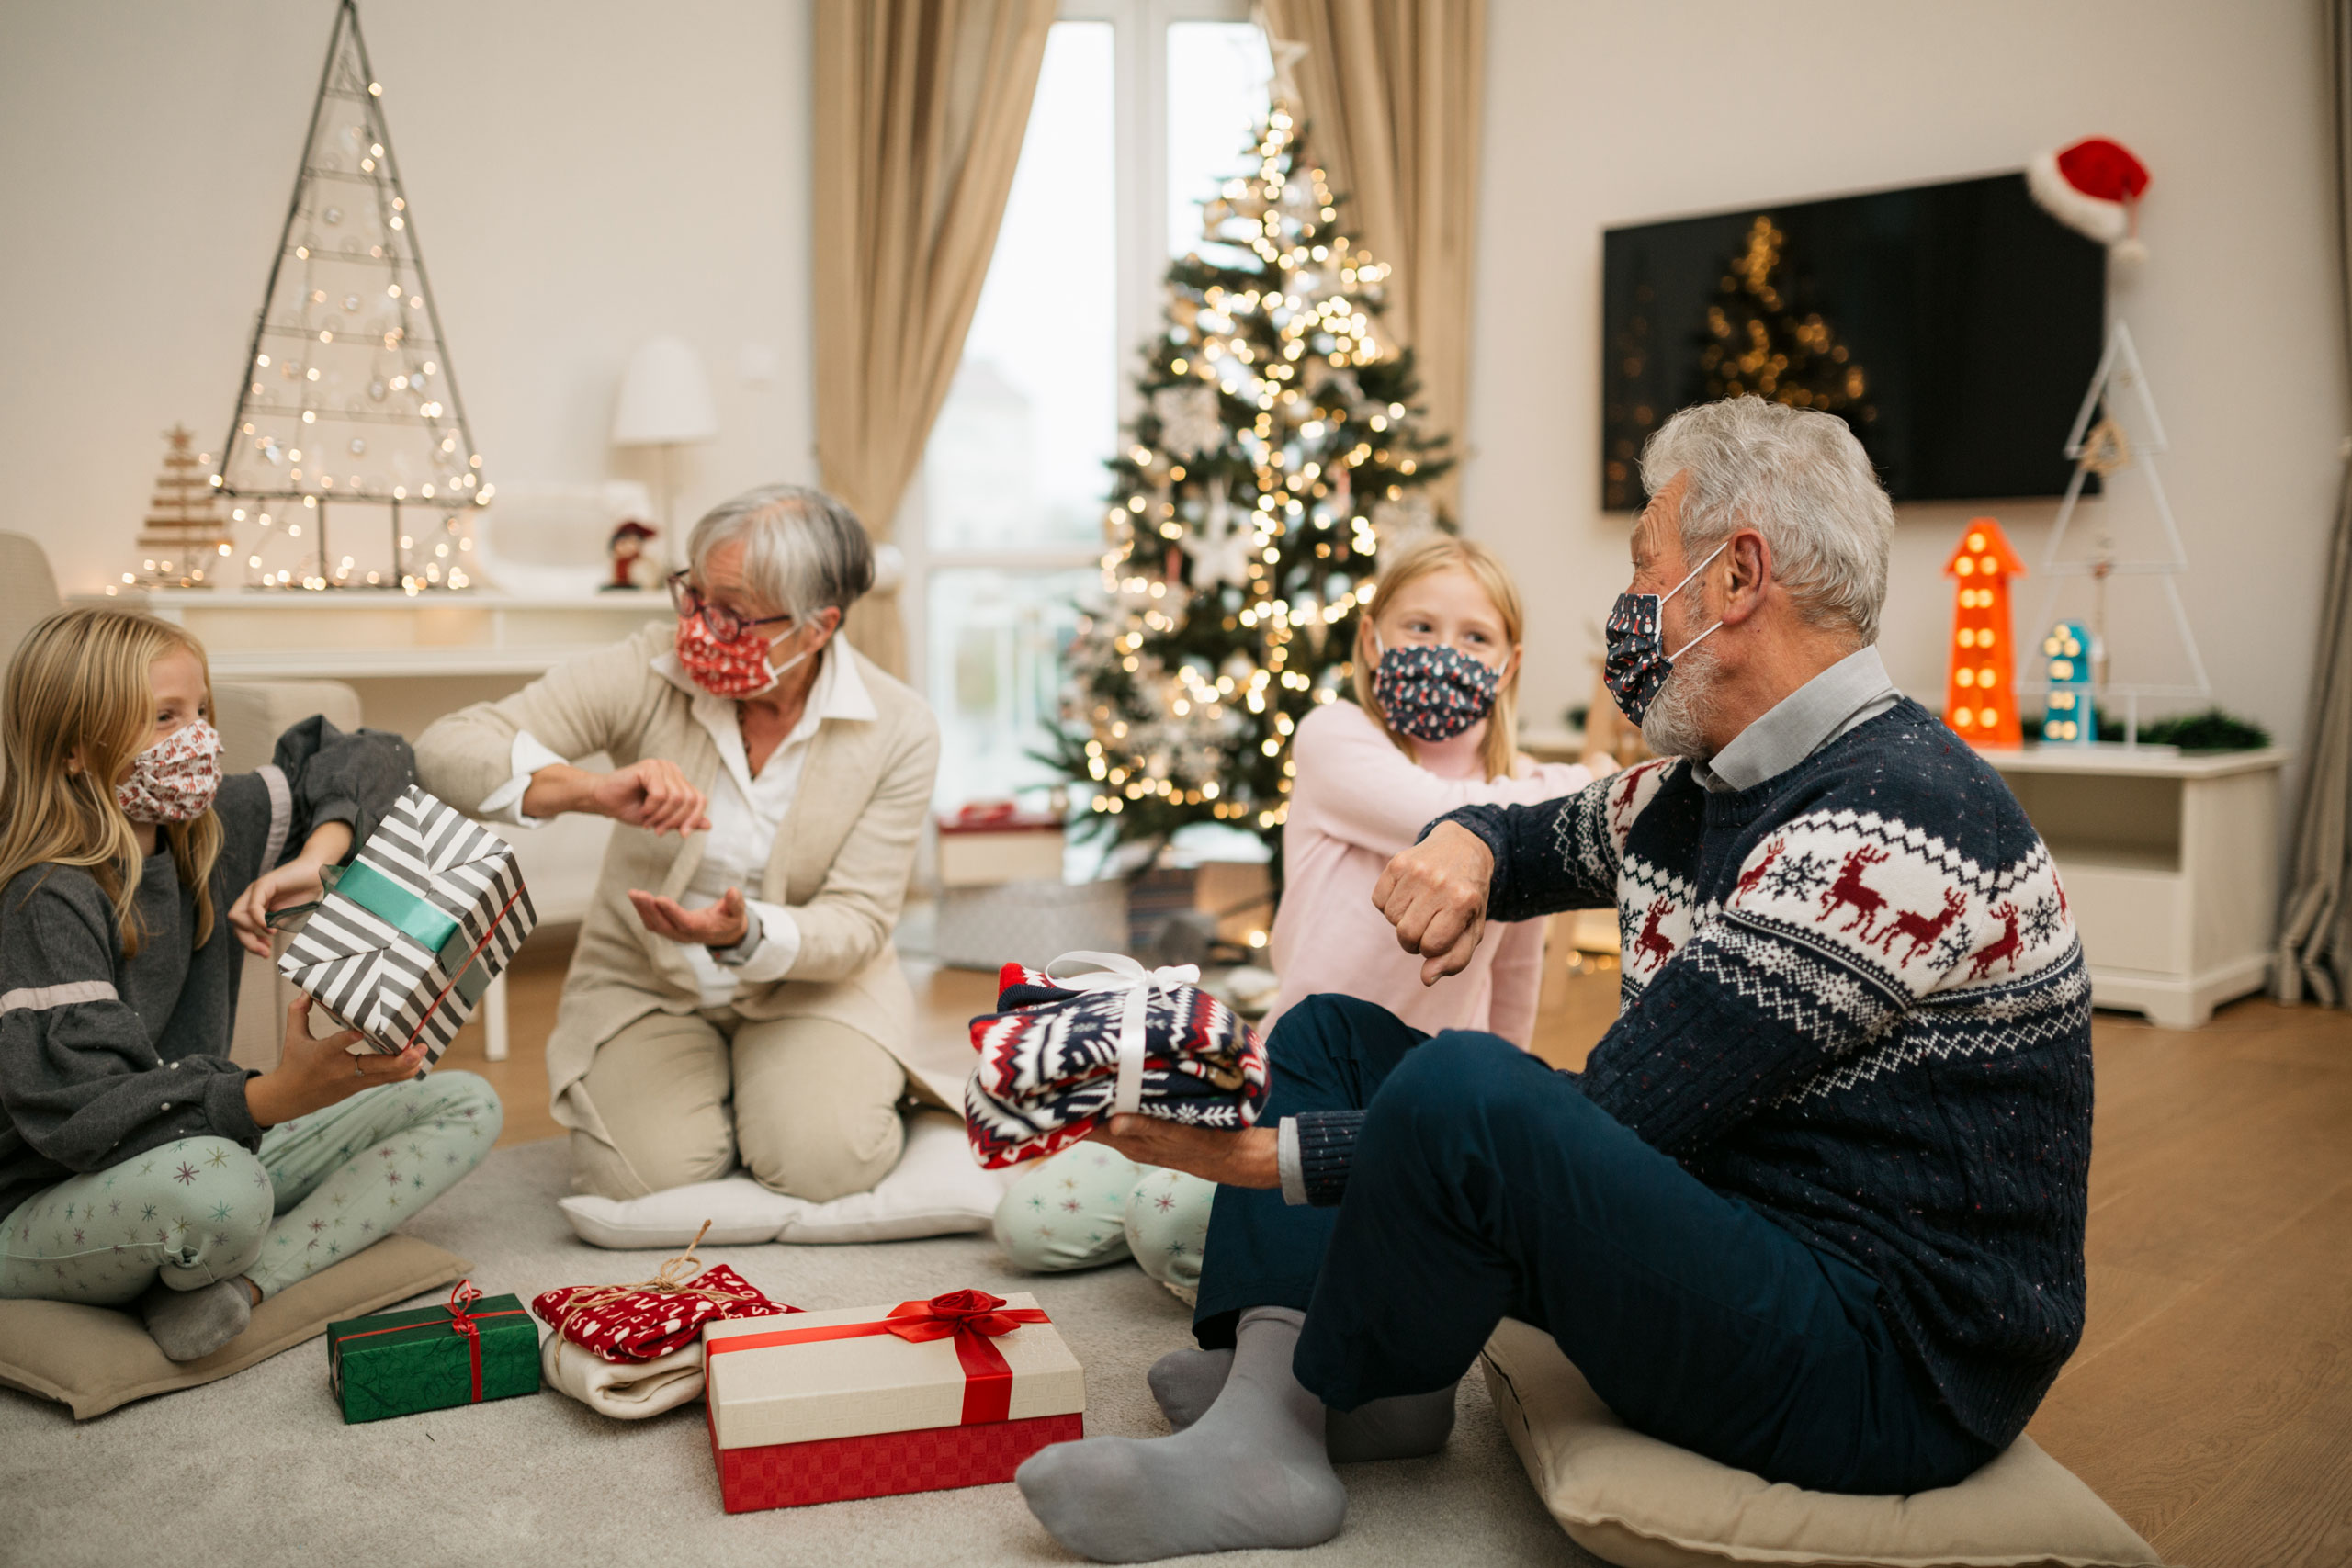 Two twin girls opening gifts with their grandparents at home for Christmas, wearing a protective face mask and maintaining social distancing